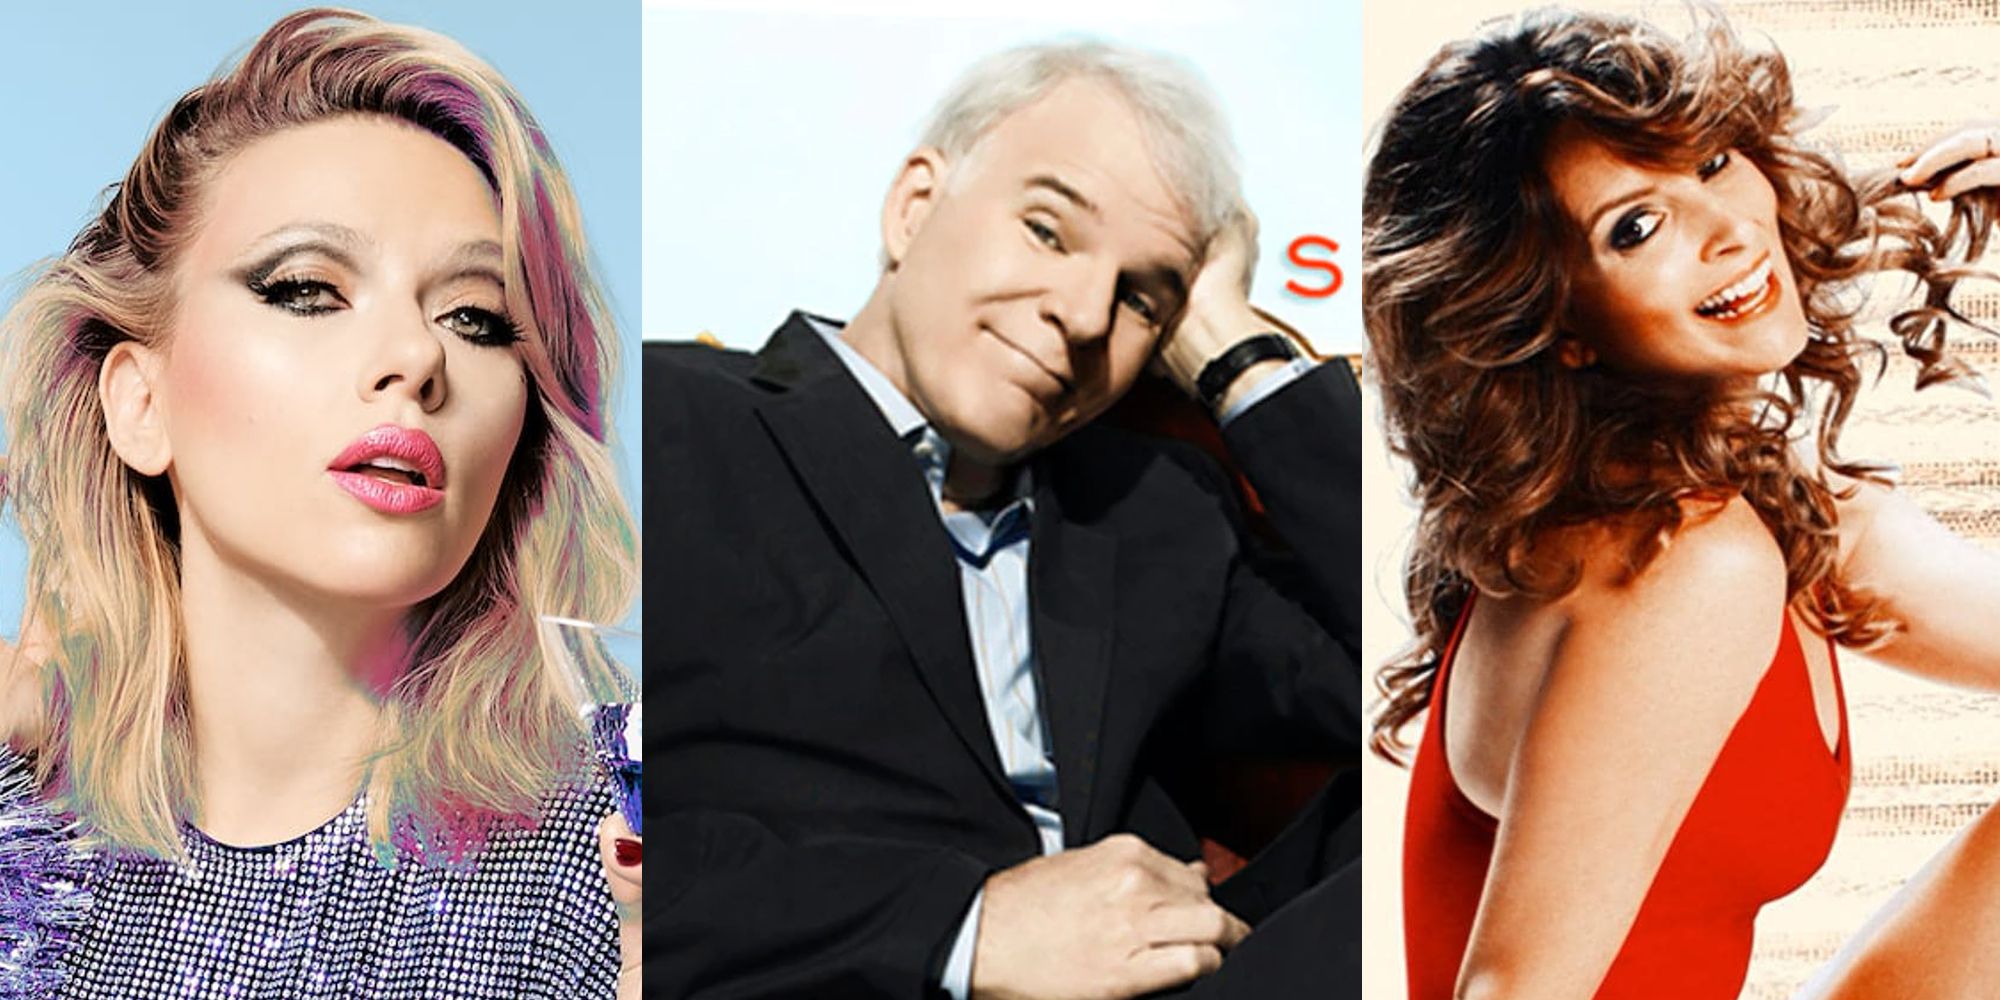 Scarlett Johansson in a title card for SNL; Steve Martin in a title card for SNL; Tina Fey in a title card for SNL